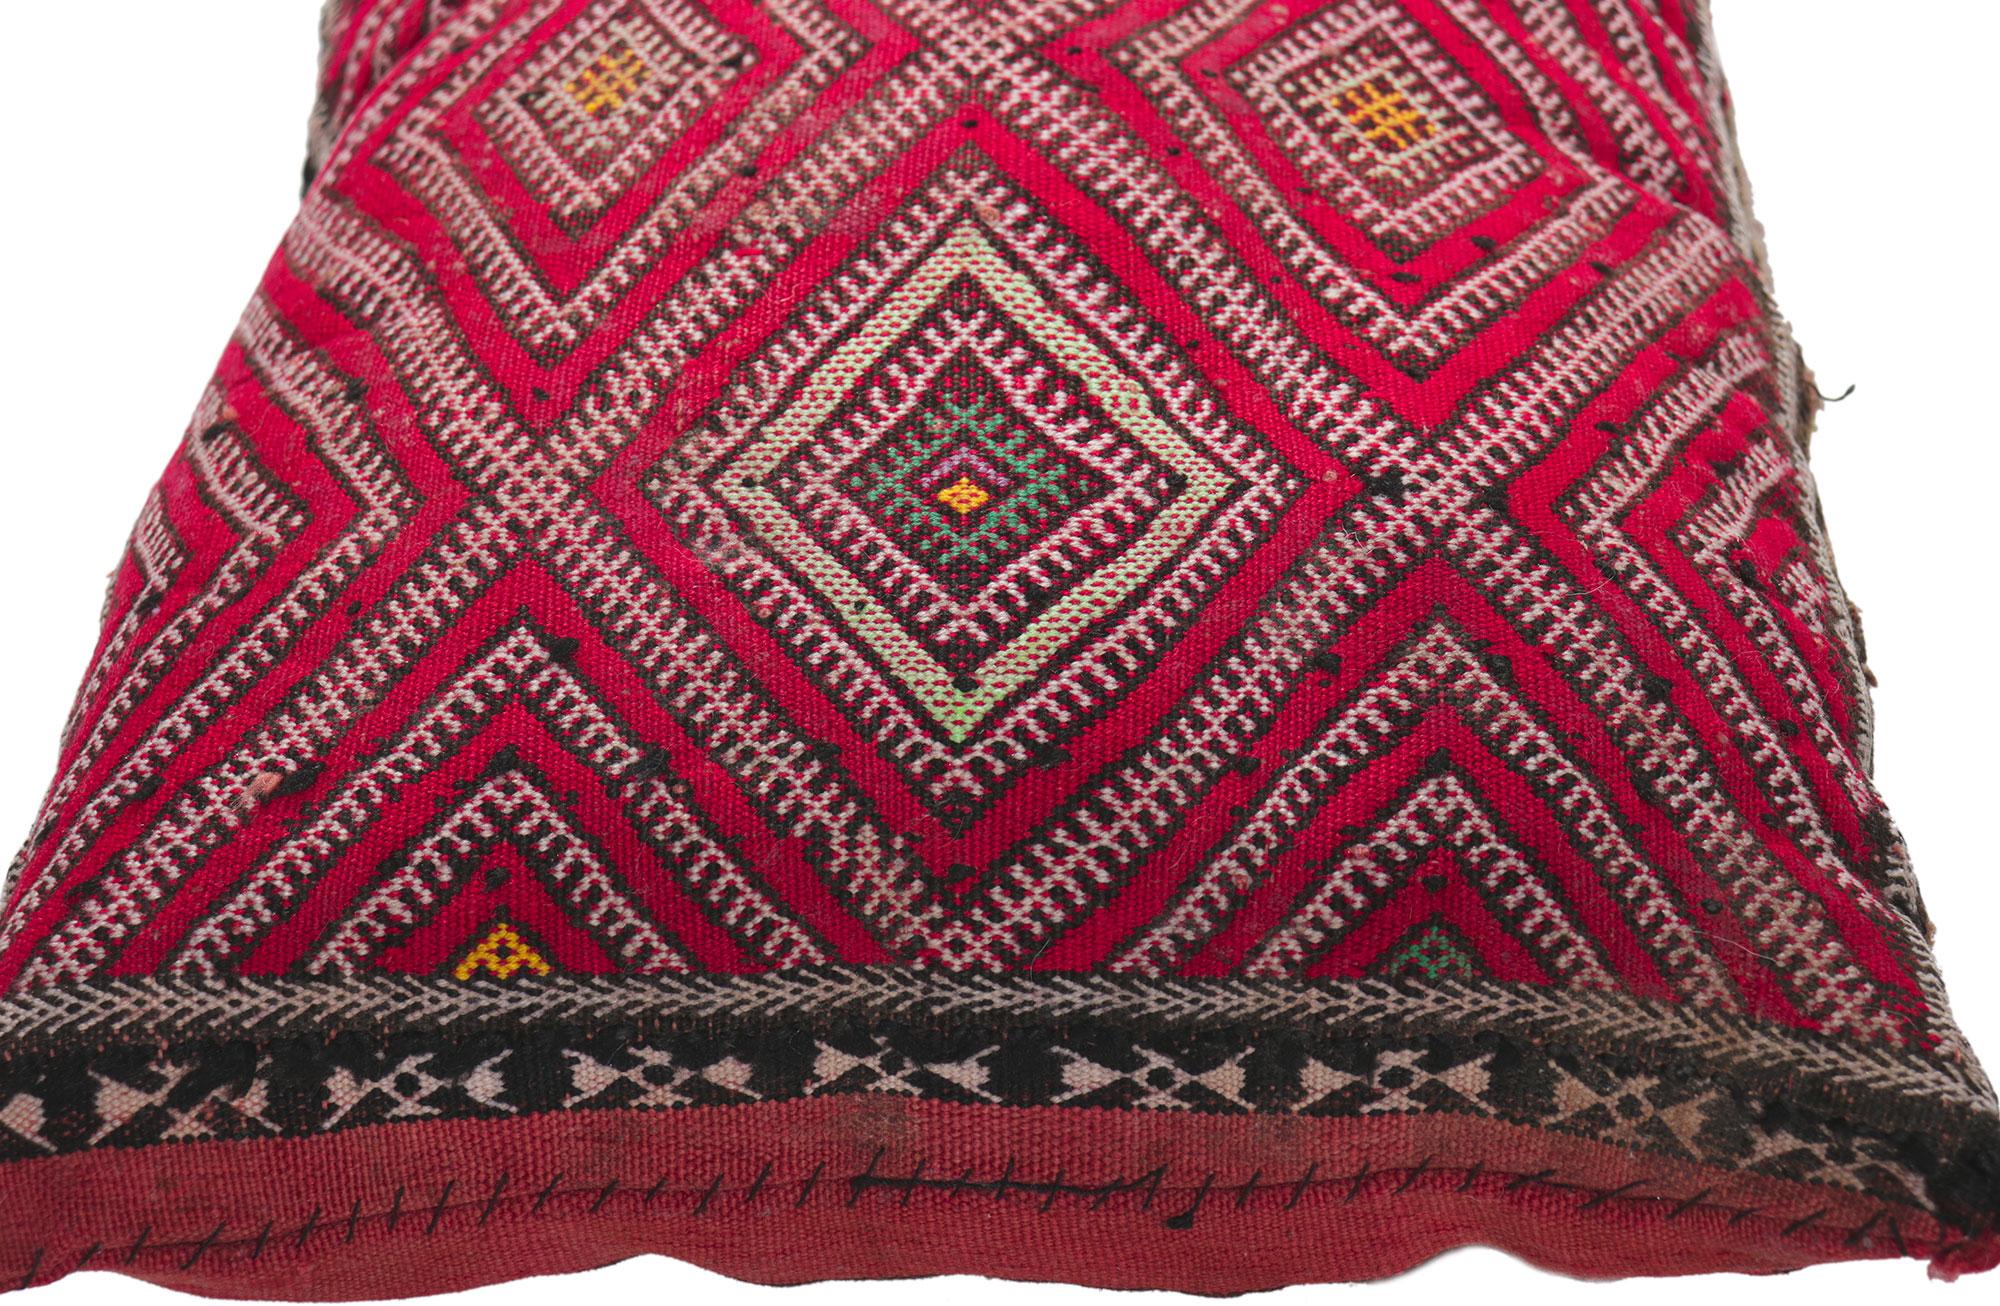 Hand-Woven Vintage Zemmour Moroccan Rug Pillow by Berber Tribes of Morocco For Sale